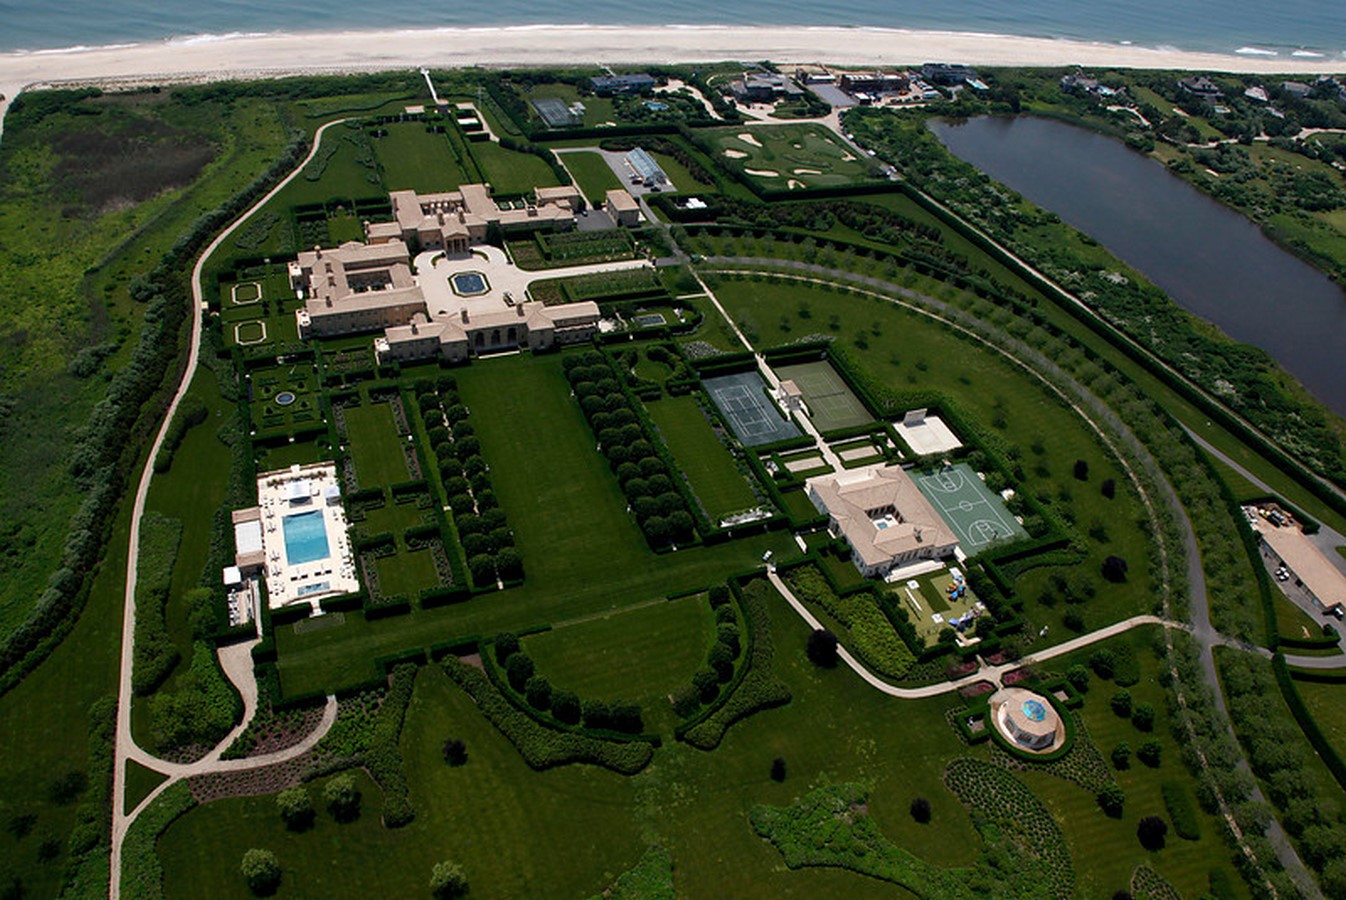 30 Biggest Houses In The World-Fairfield Pond, Hamptons - Sheet